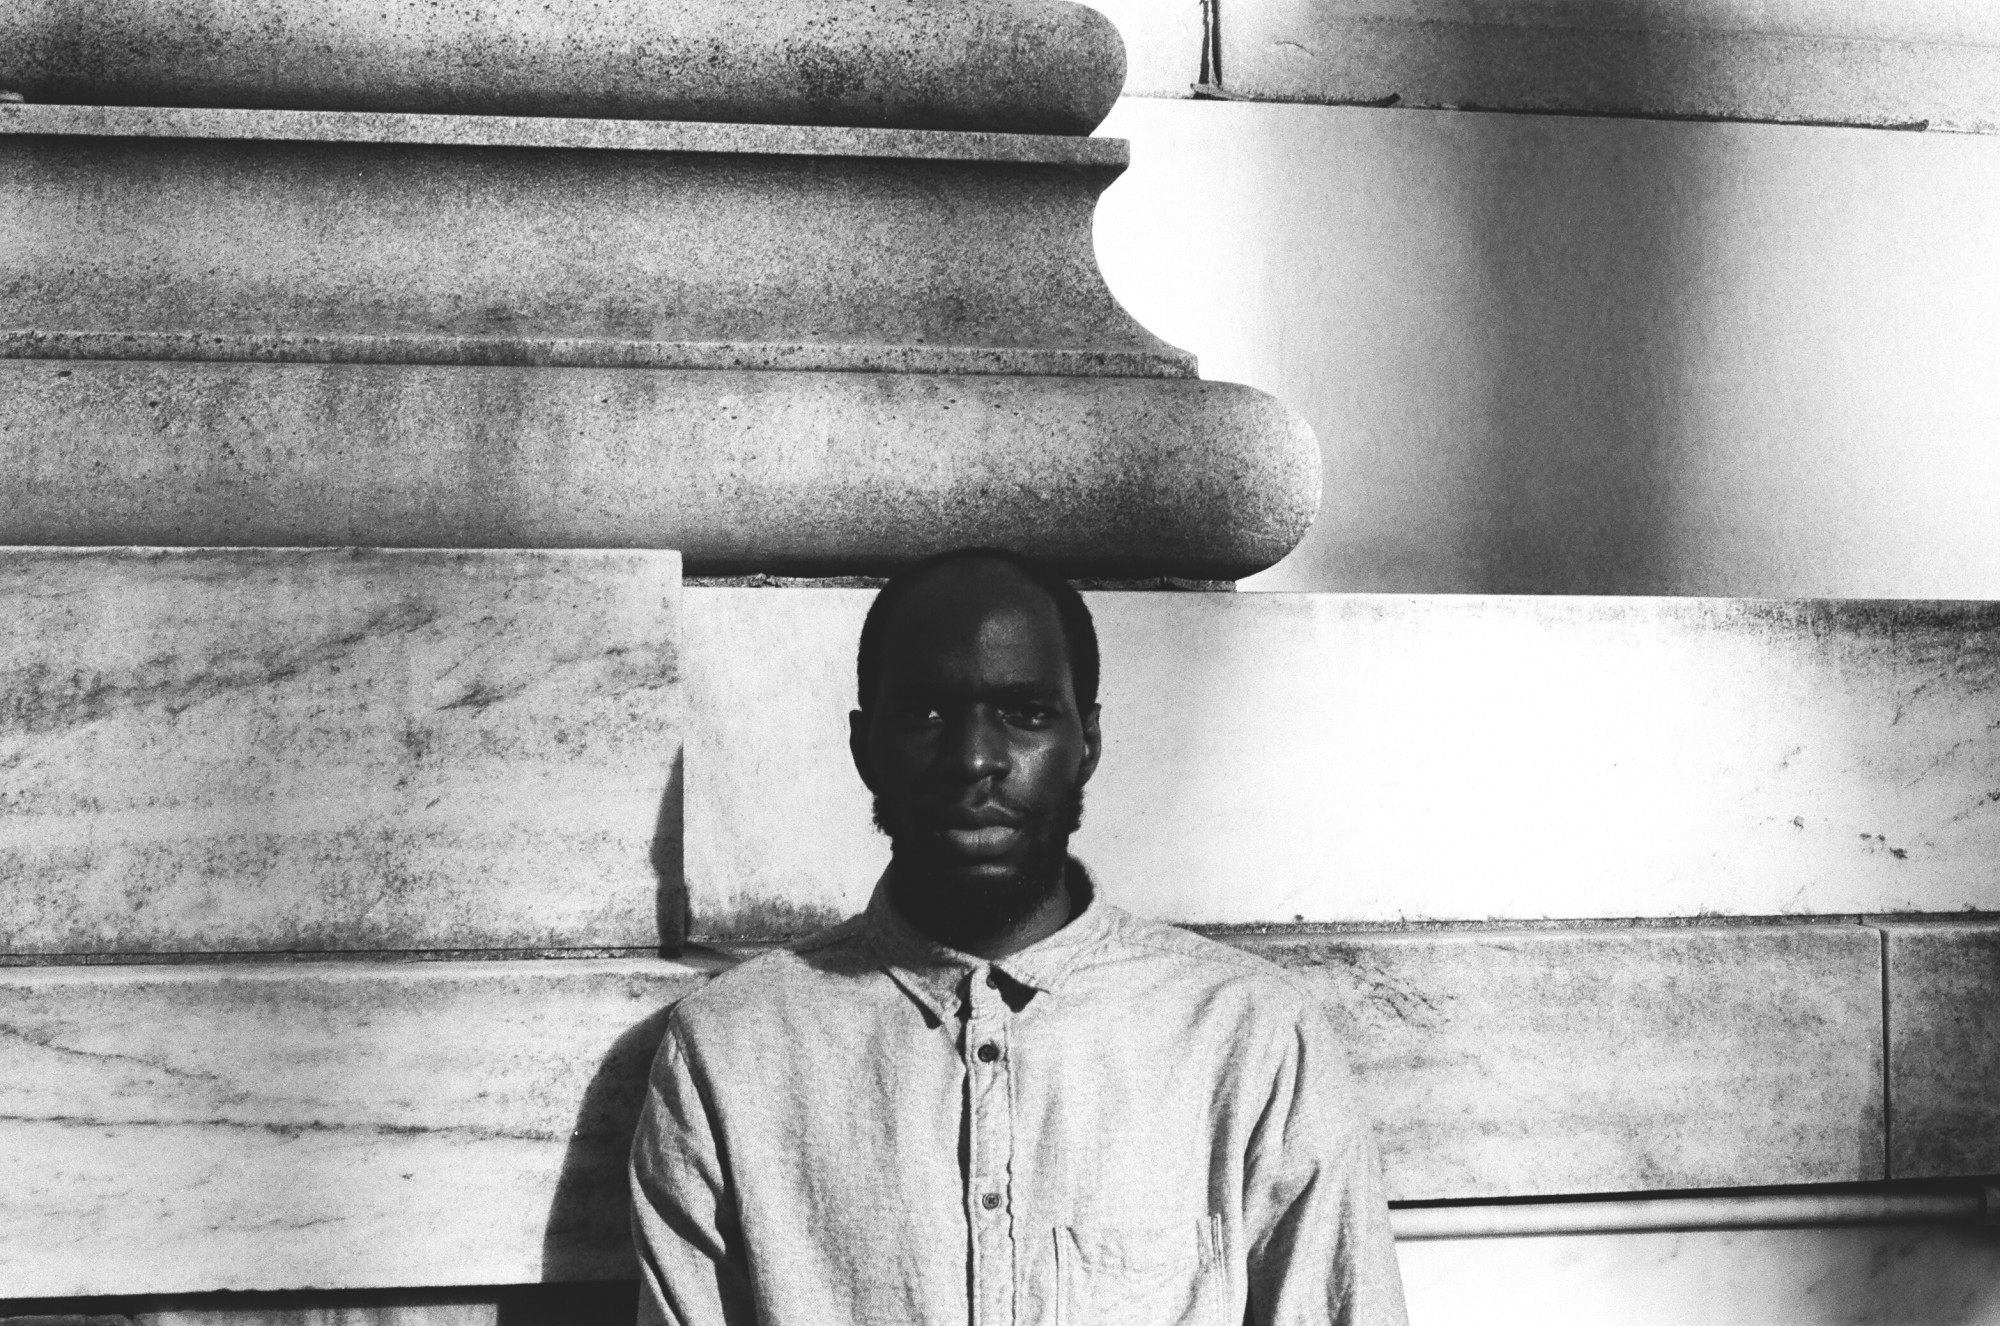 Tobi Kassim is standing in front of a large column in this black and white portrait.